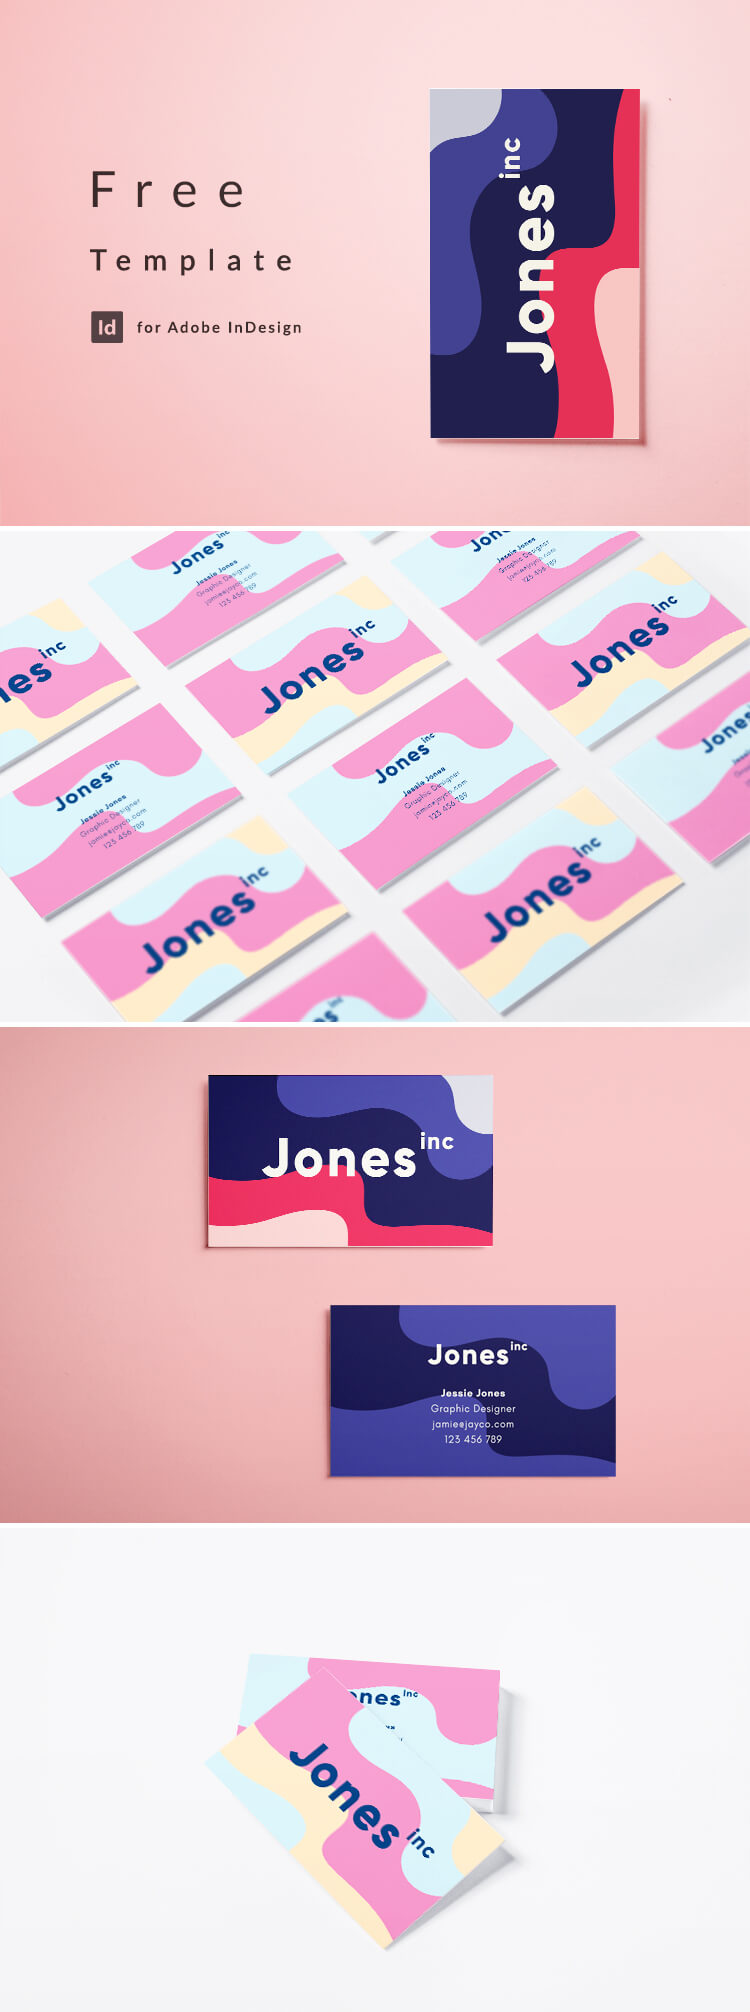 Eighties business card layout. Wavey, graphic, colorful design for creatives. Free to download. Free Template for InDesign CC.